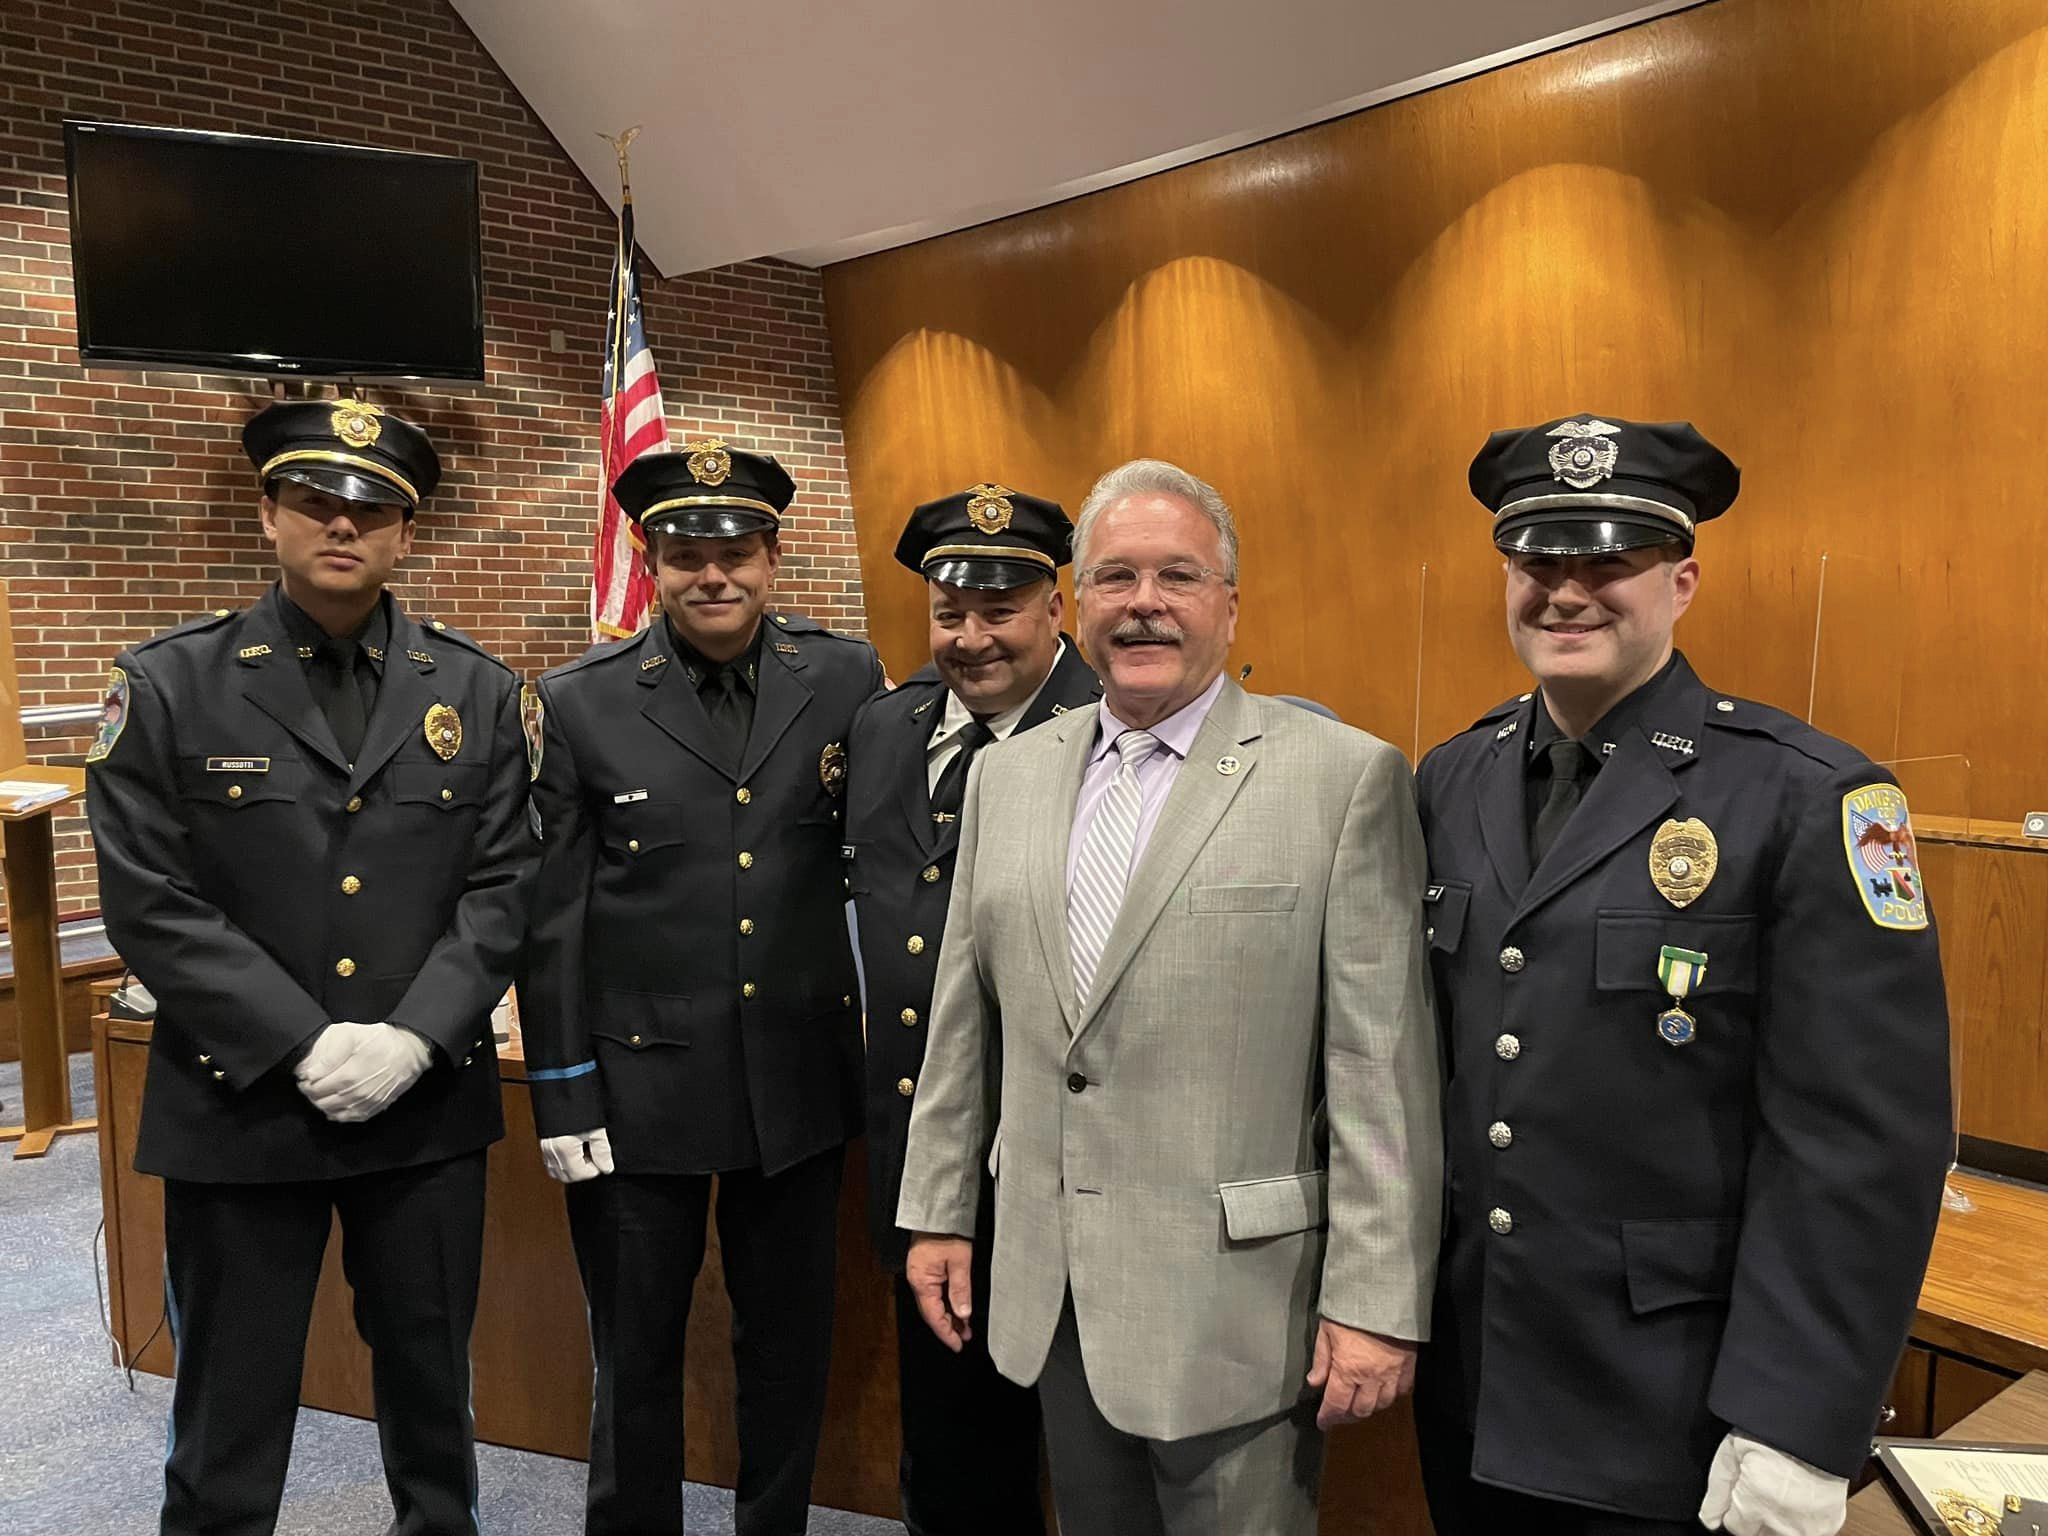 Mayor Dean Esposito with local police officers